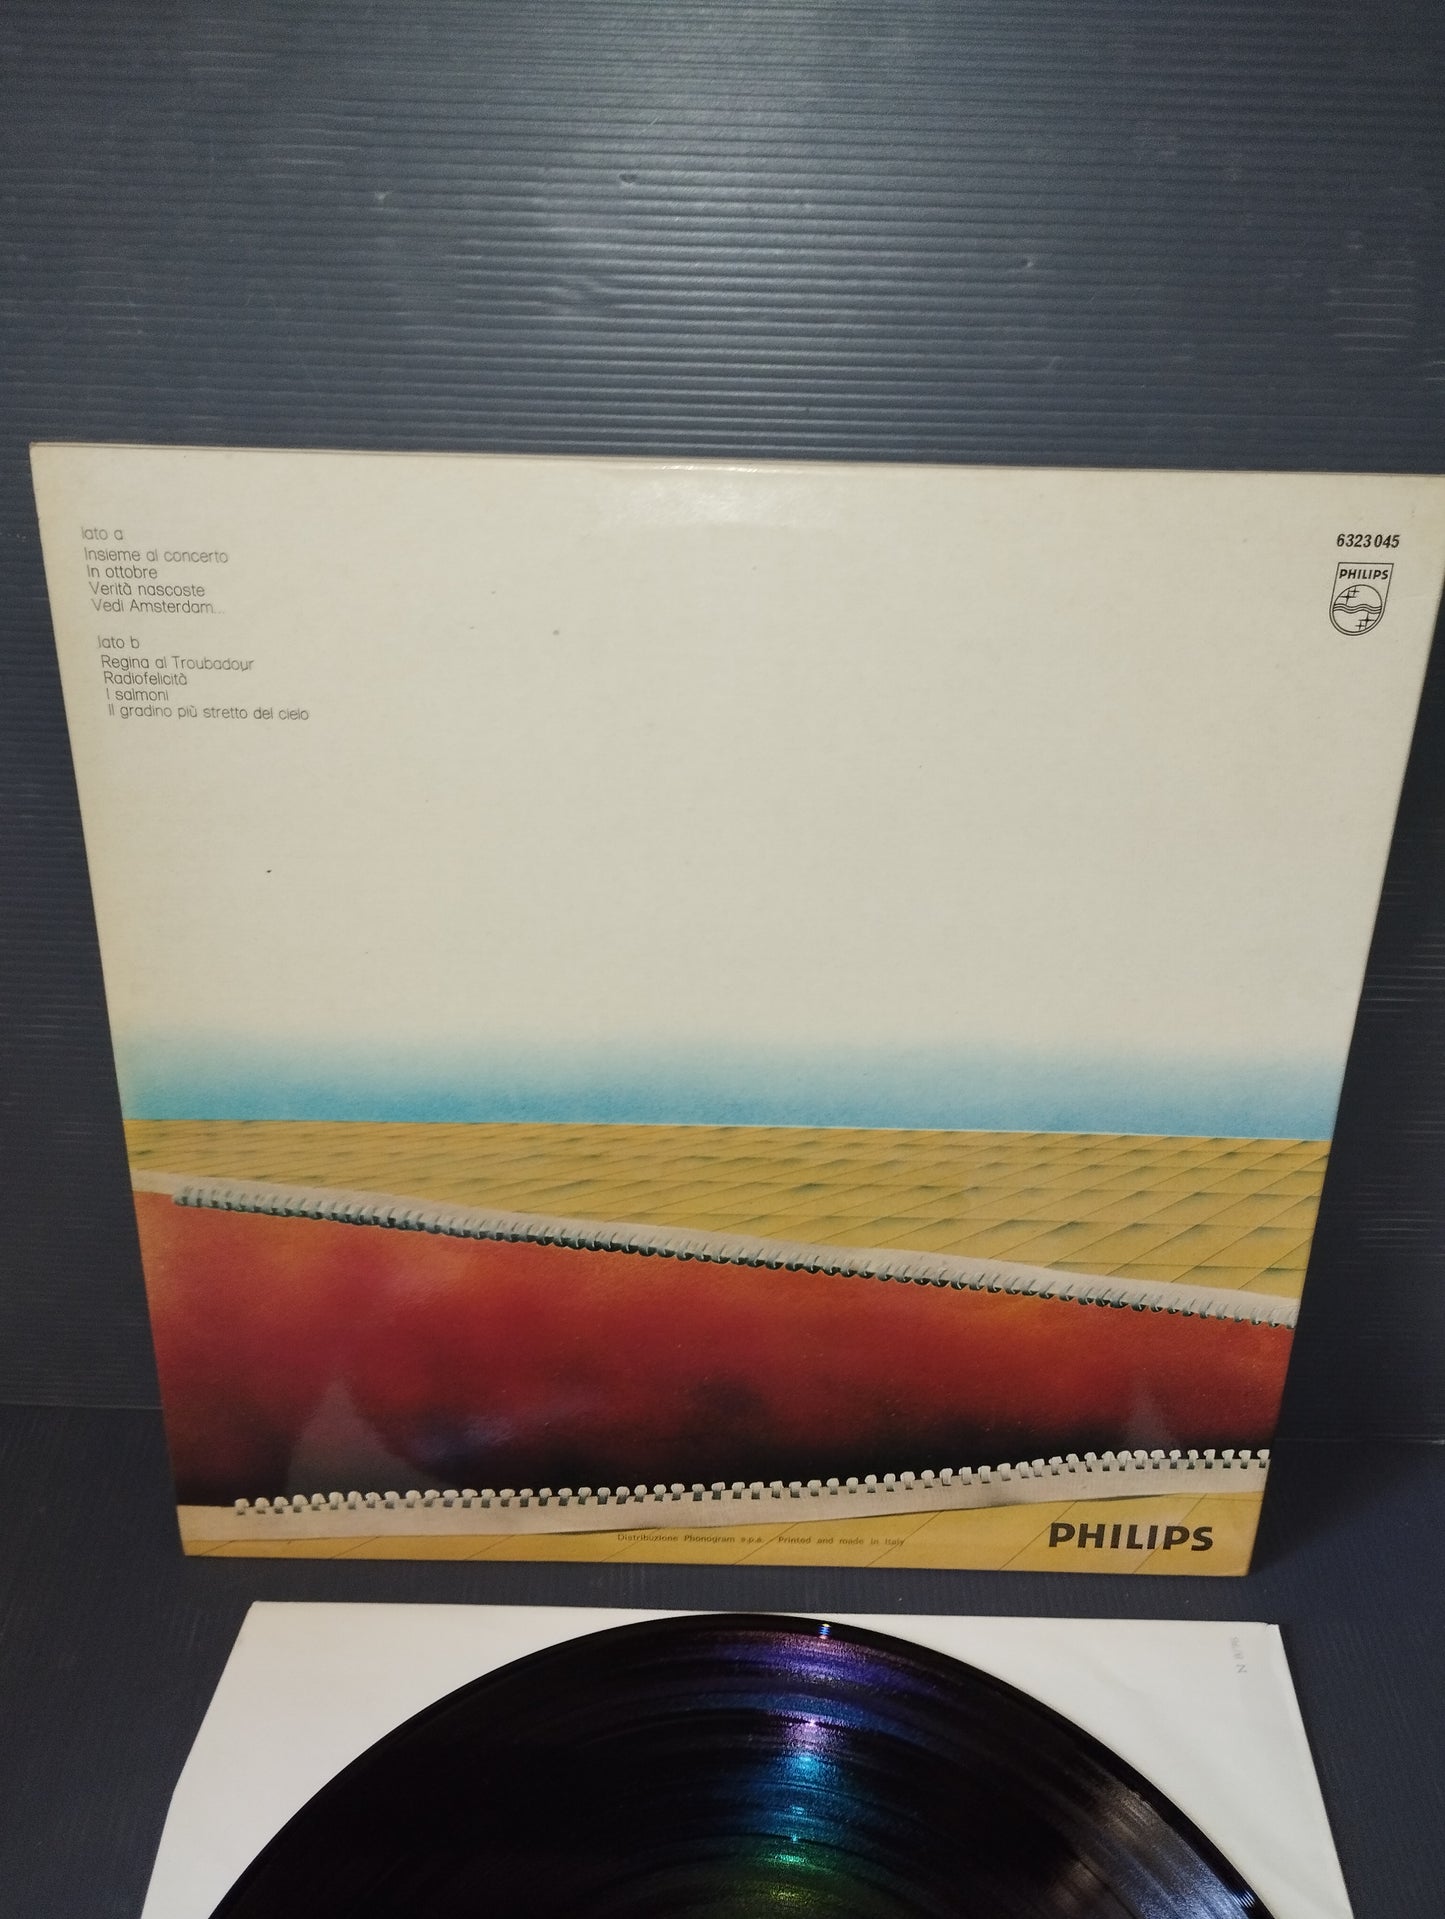 Hidden Truths" Le Orme Lp 33 Laps Published in 1976 by Philips code 6323 045